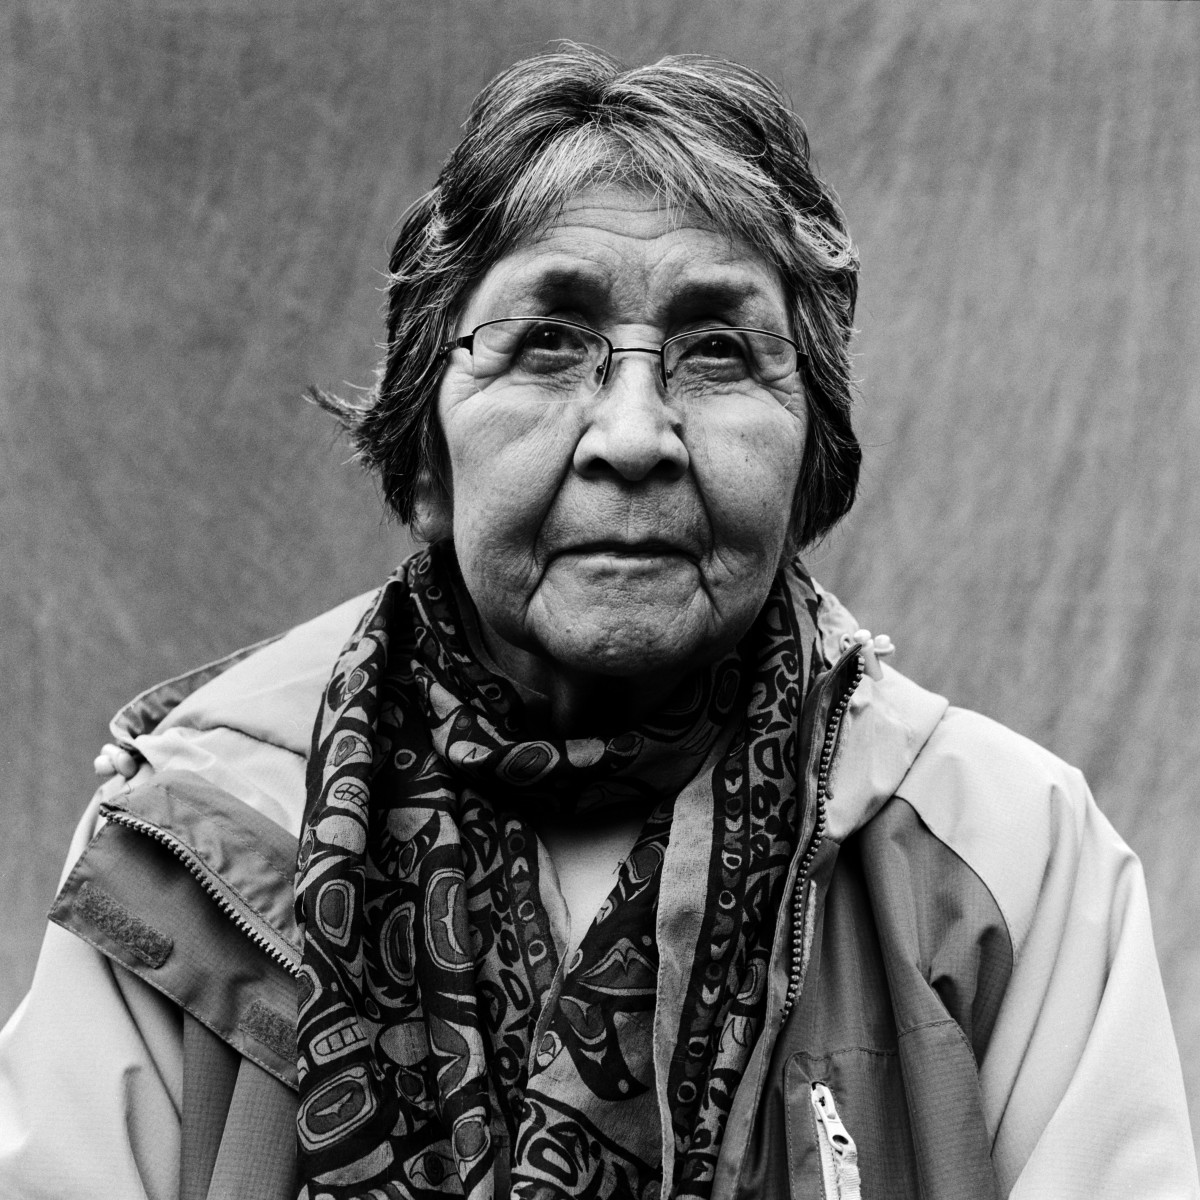 Helen Dick grew up in a fluent speaking home and continues to speak her language fluently.  "I used to hear my mom tell us, 'just be who you are. Don't let people try to change who you are or what you are. You be you.' So that's how I've tried to live my life," said the Tseshaht elder, on Jan. 20, 2021.